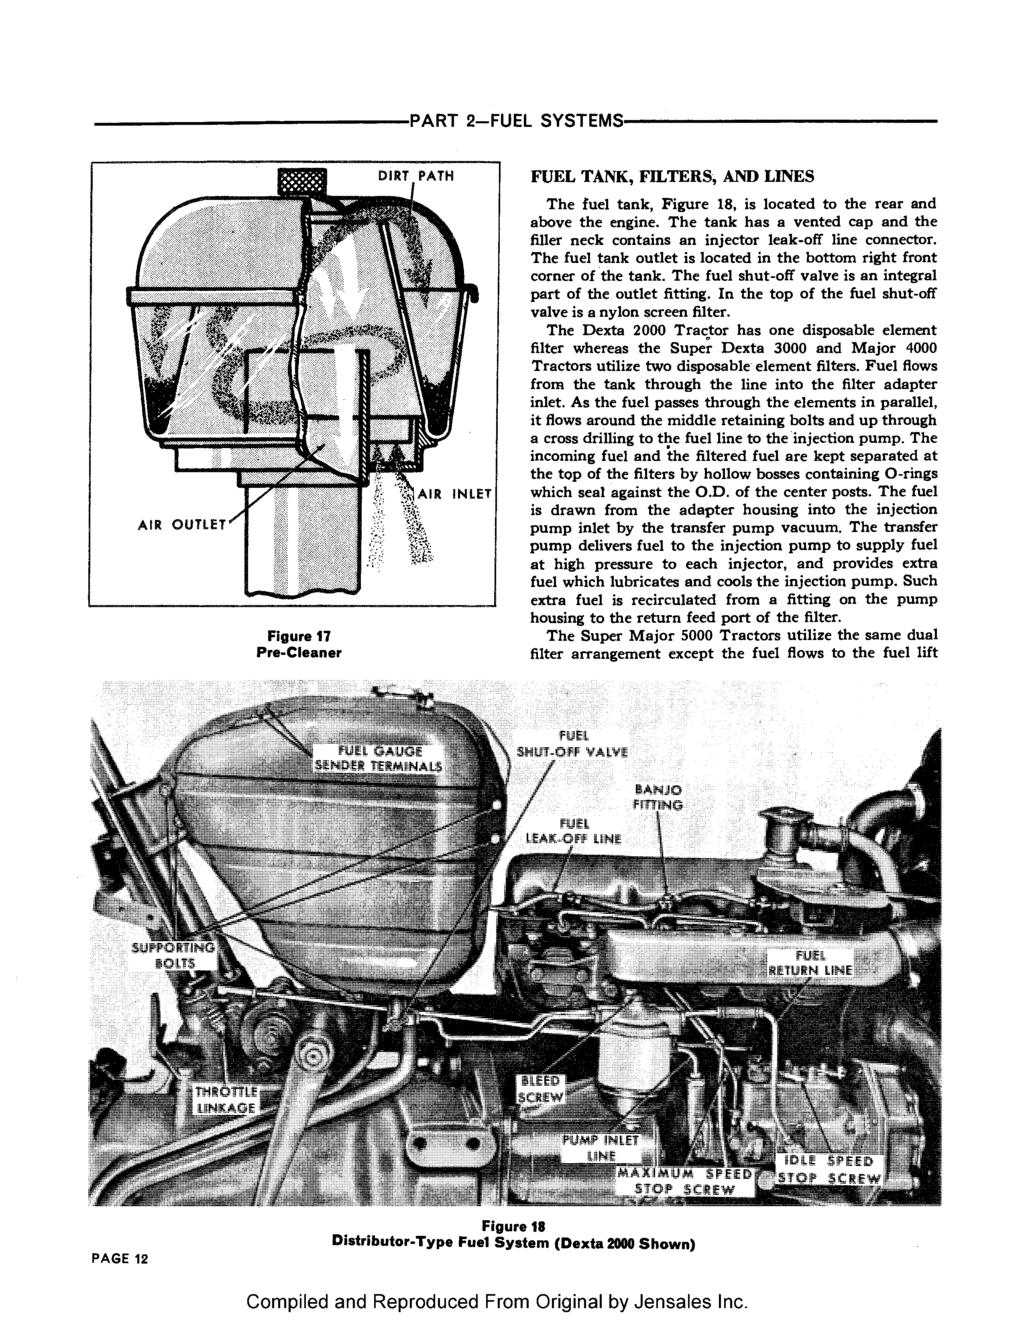 -------------------------PART2-FUELSYSTEMS------------------------- Figure 17 Pre-Cleaner FUEL TANK, FILTERS, AND LINES The fuel tank, Figure 18, is located to the rear and above the engine.